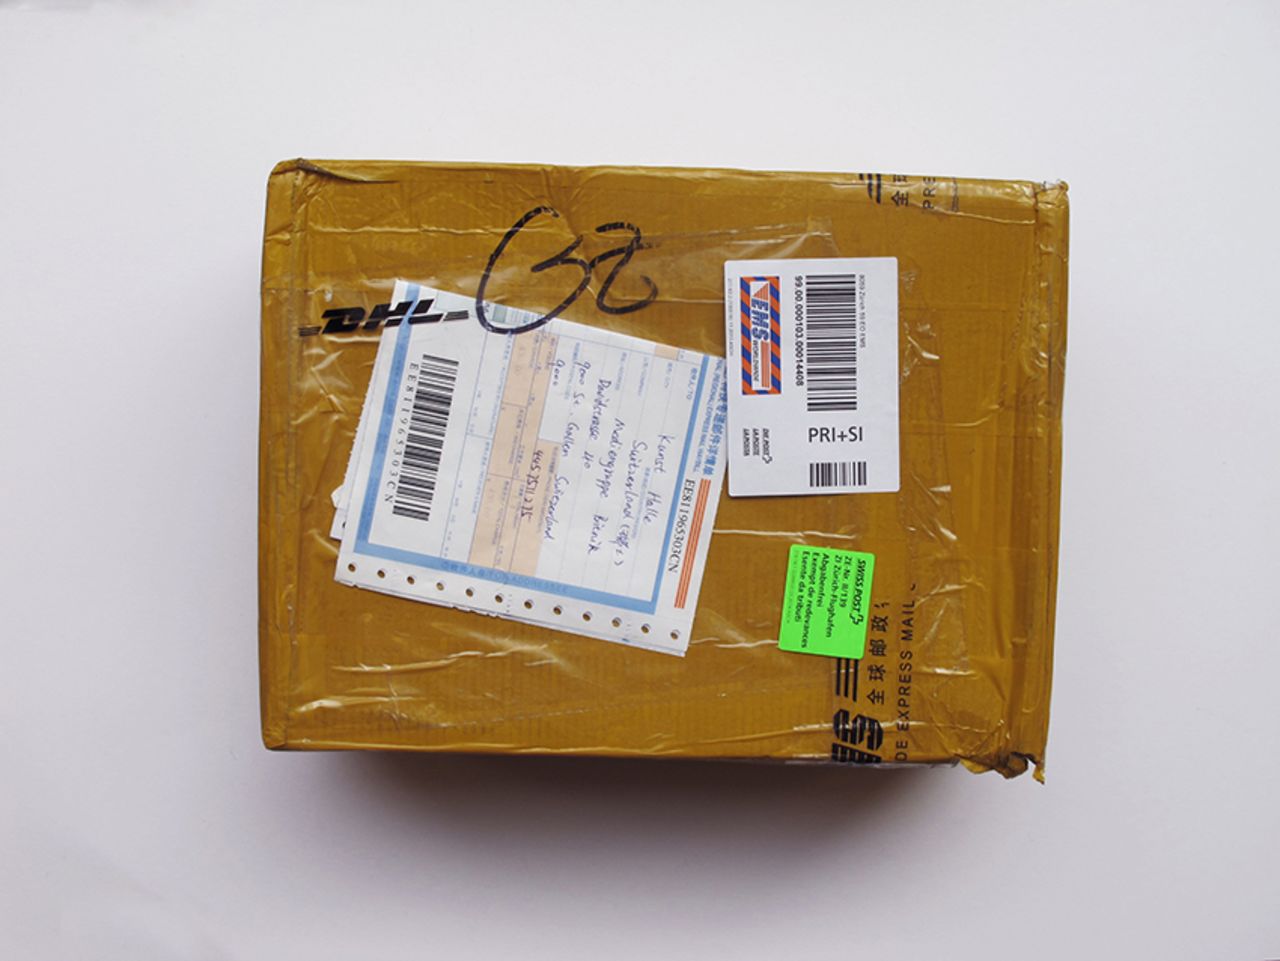 This parcel contains a pair of Nike shoes, bought from China for $75.